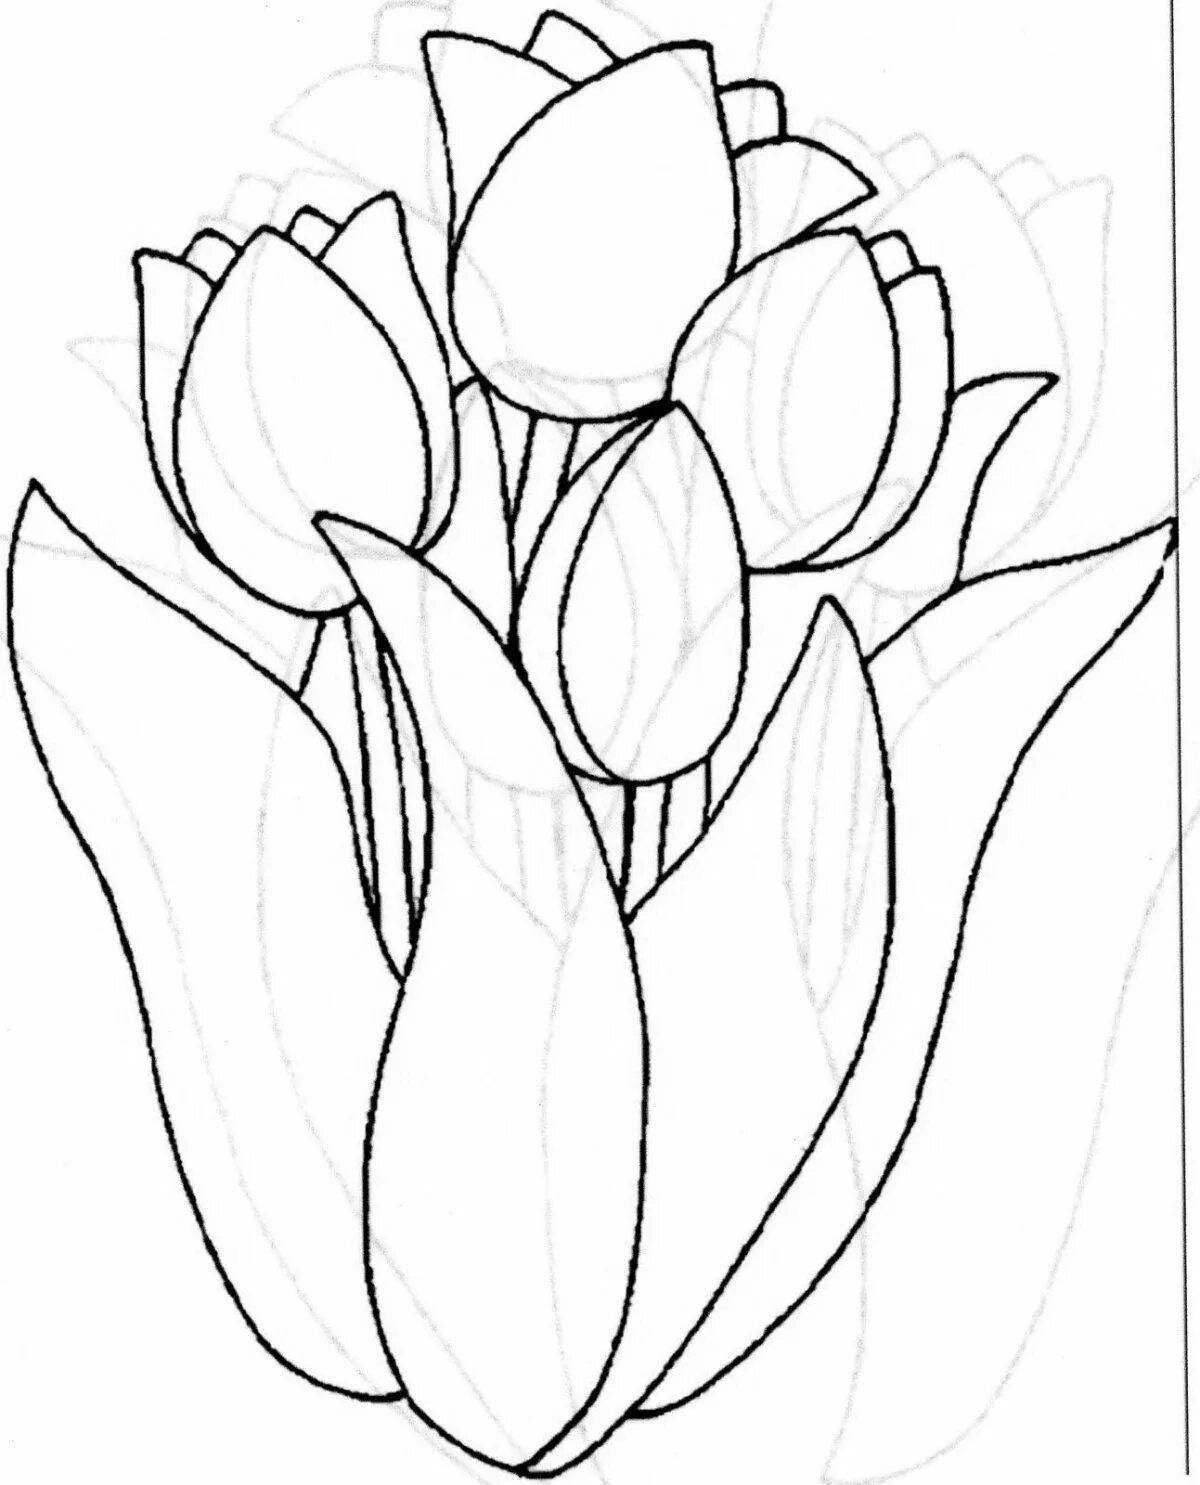 Coloring book blooming spring tulips